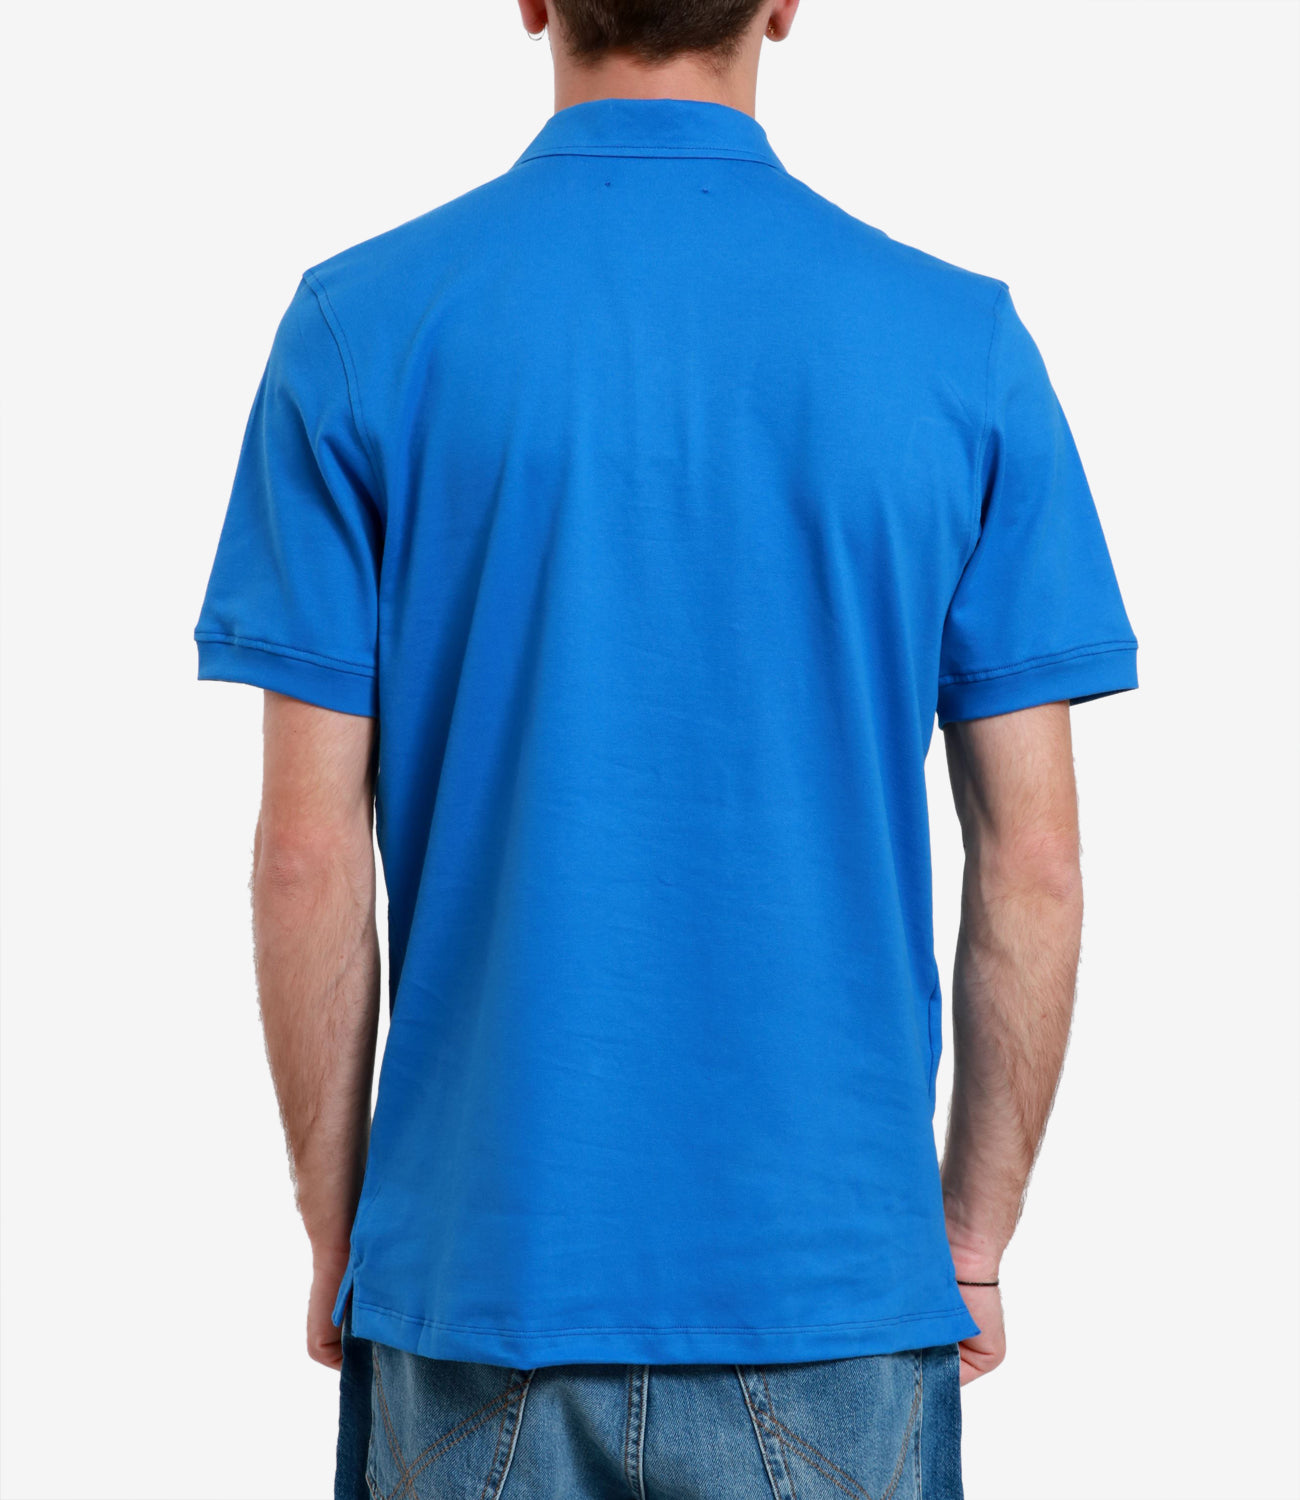 Rooster | Blue and Orange Polo